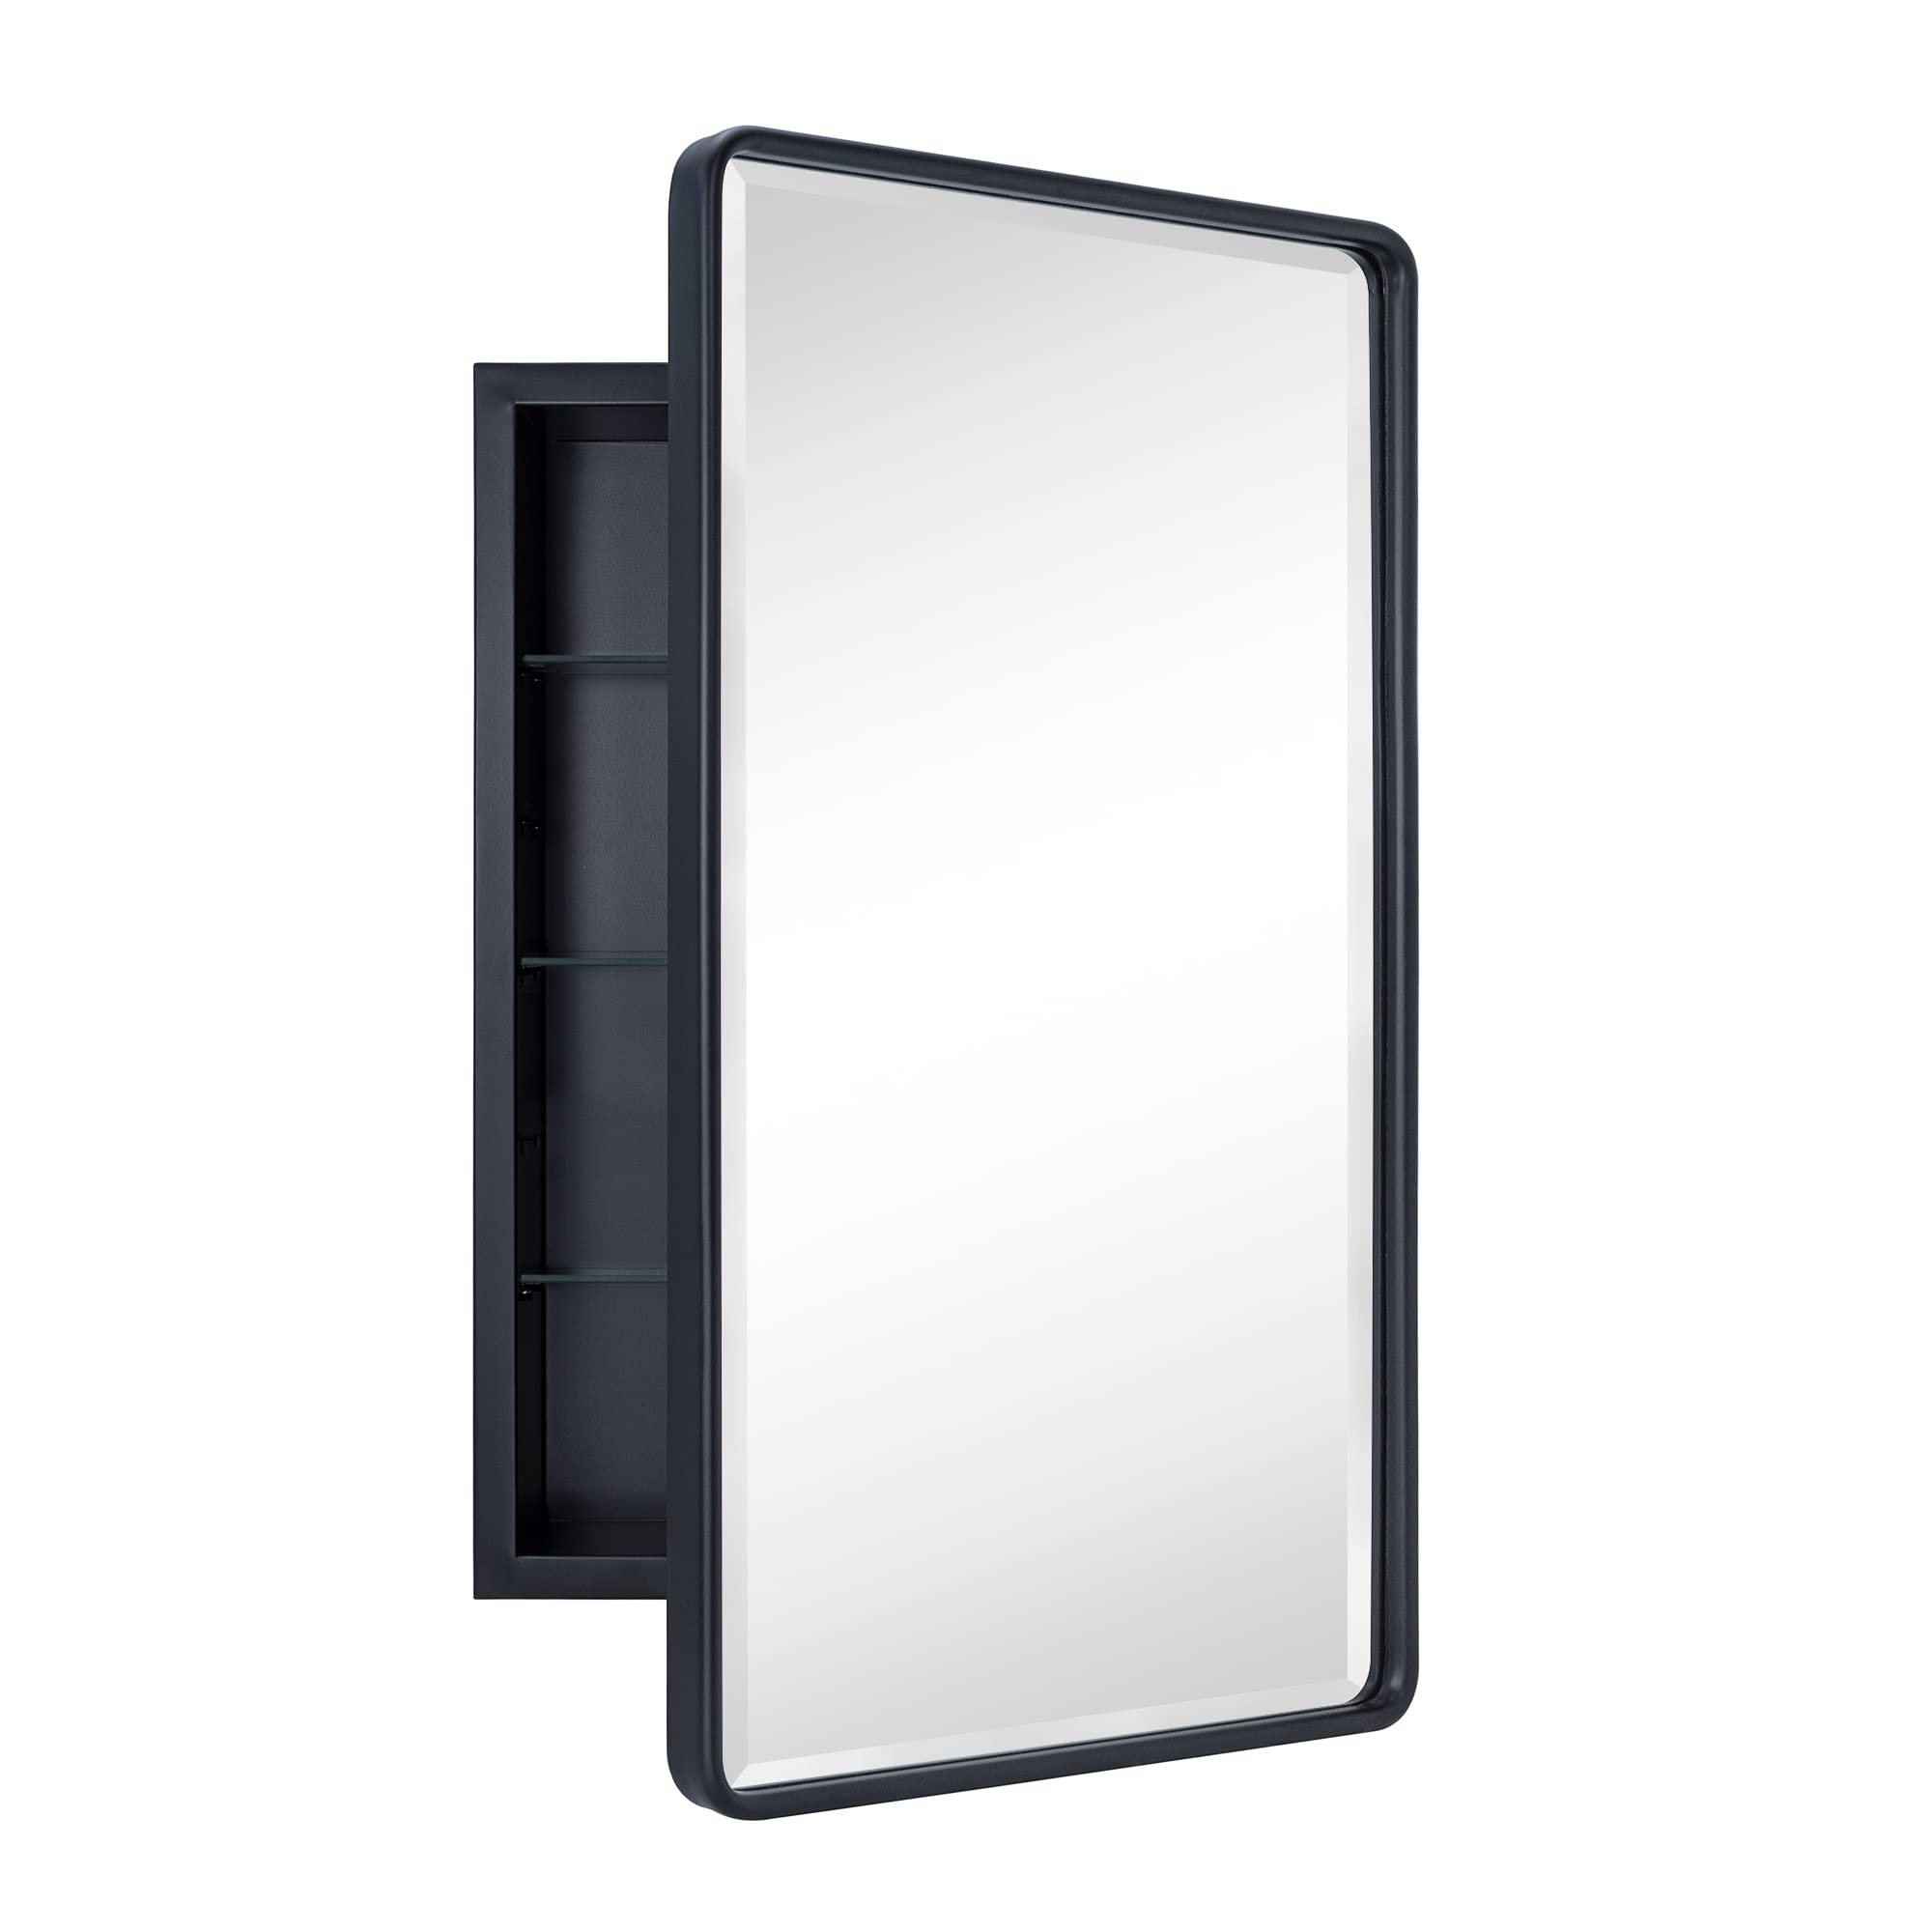 TEHOME Farmhouse Black Metal Framed Recessed Bathroom Medicine Cabinets with Mirror Rounded Rectangle Tilting Beveled Vanity Mirros for Wall 16.5x27.5''